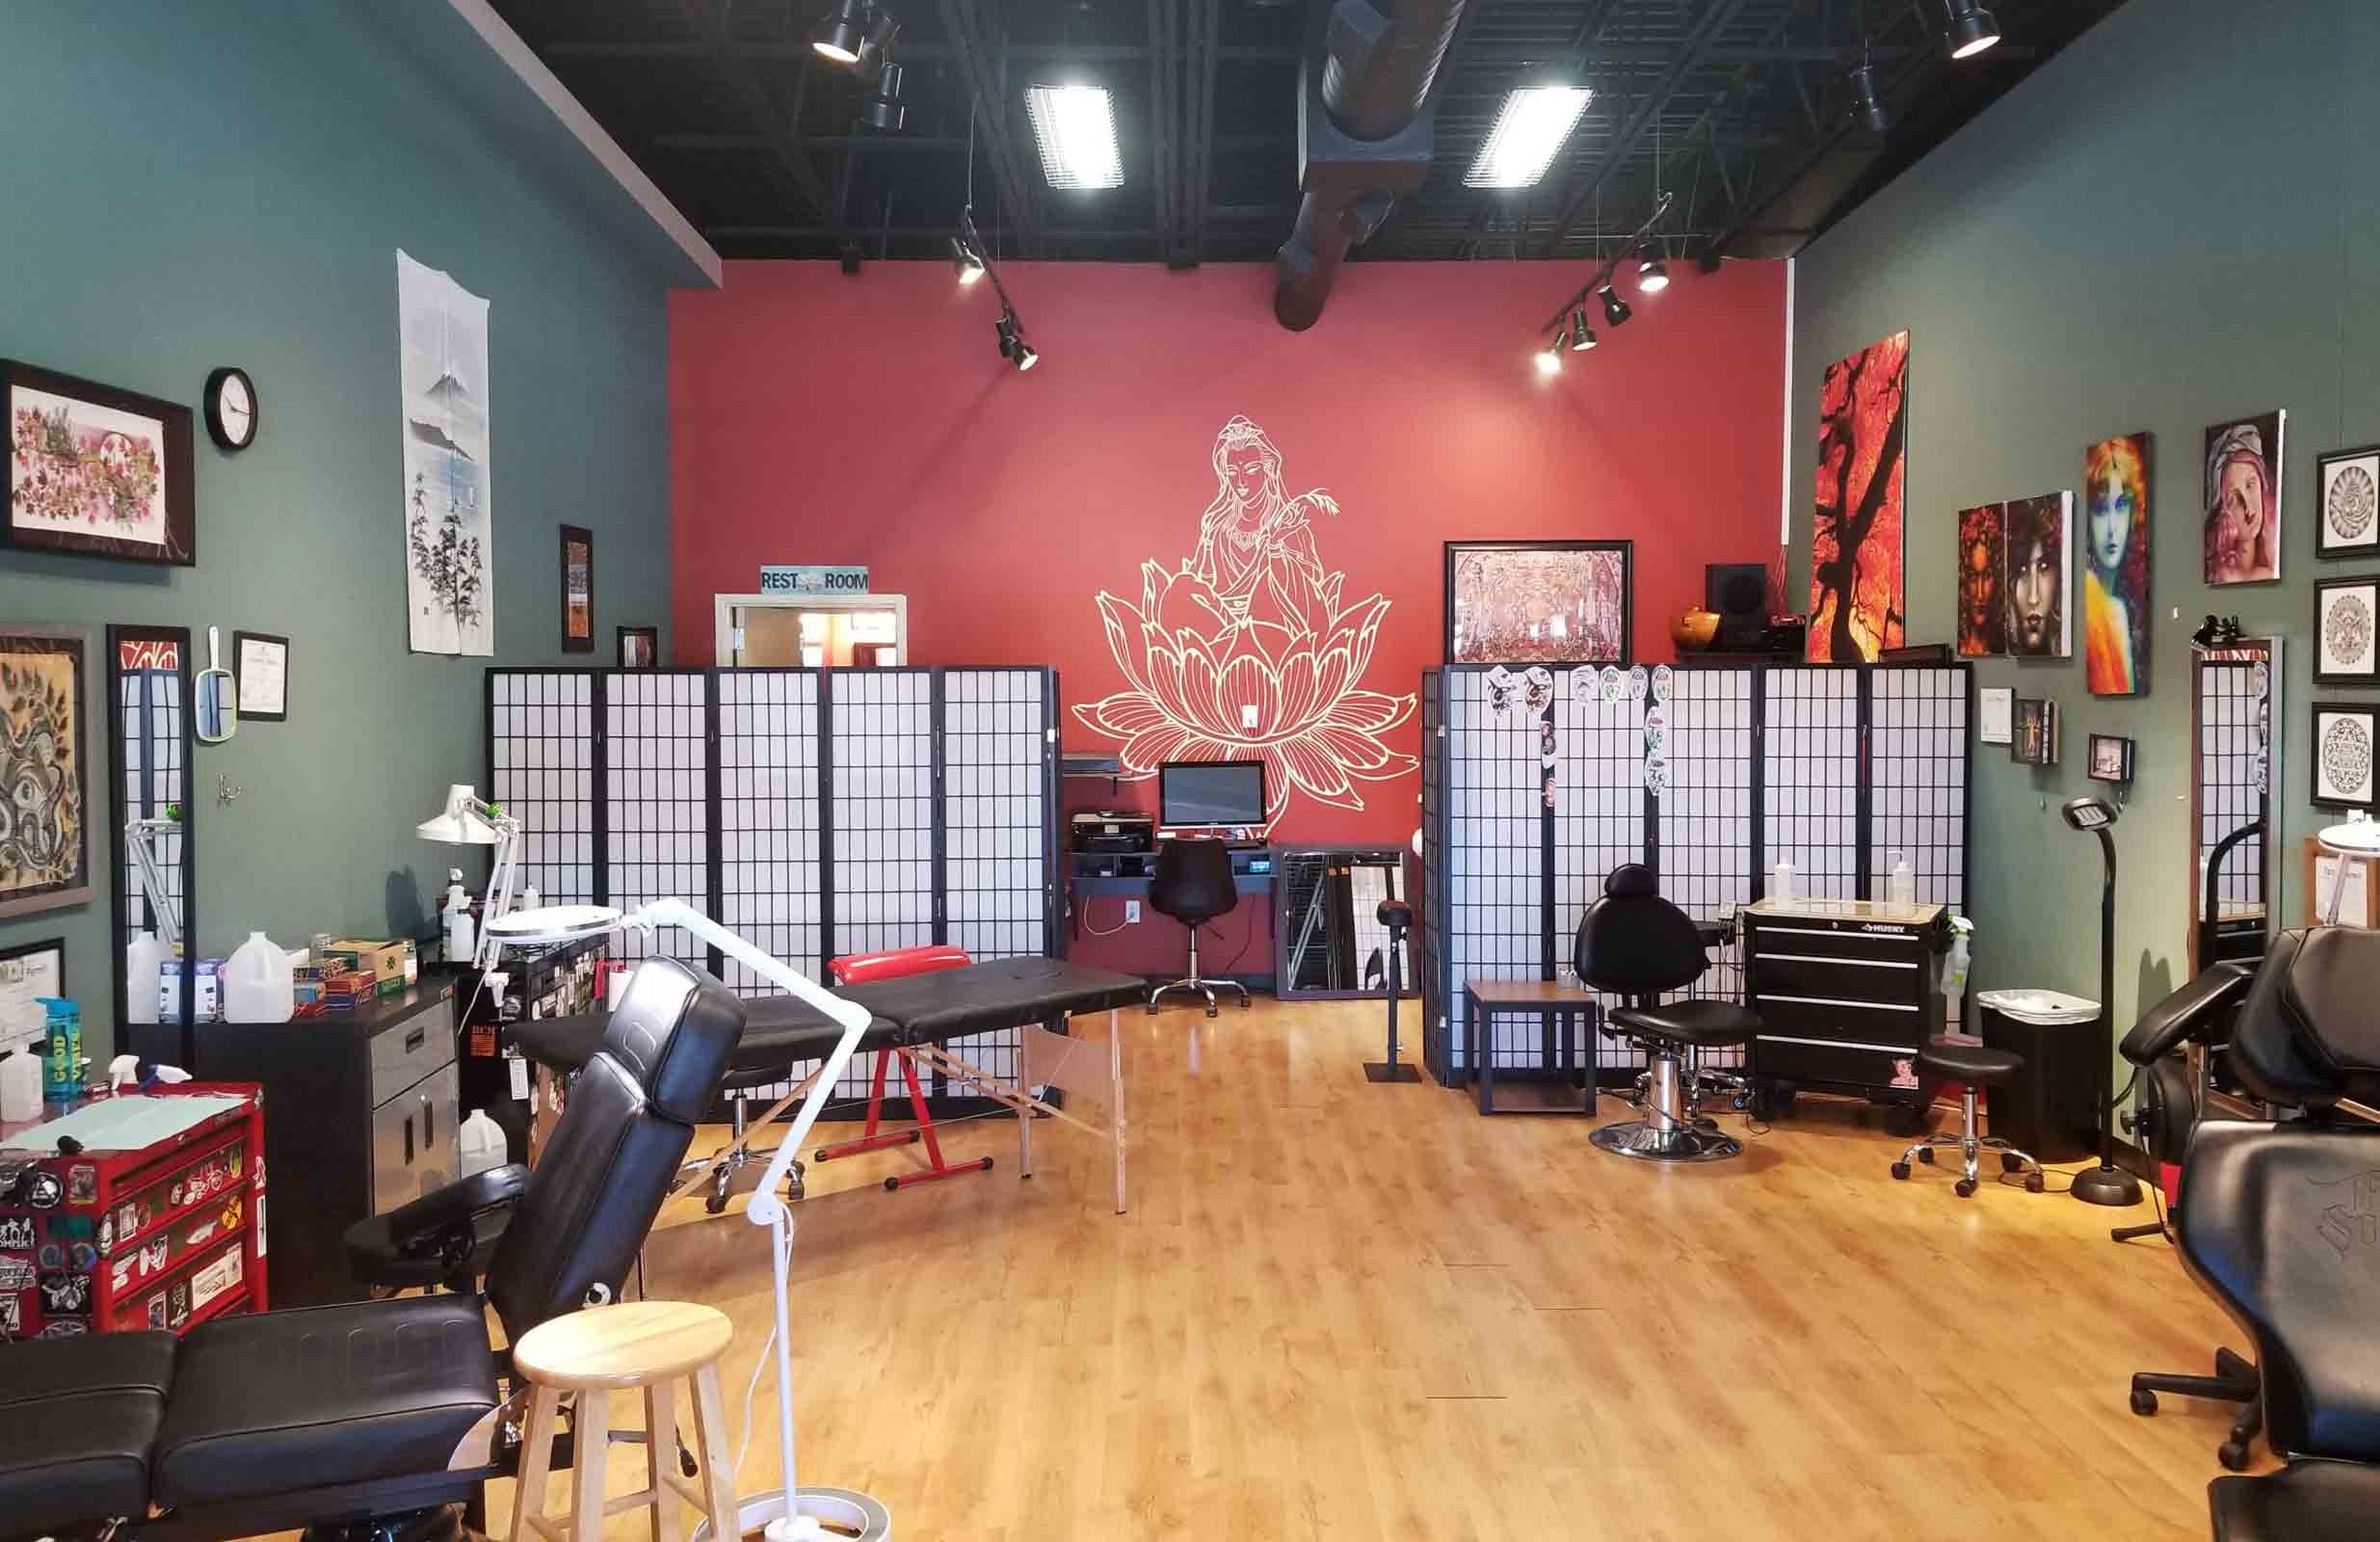 Thistle and Pearl Tattoo 107 Merrimon Ave Asheville NC Tattoos   Piercing  MapQuest